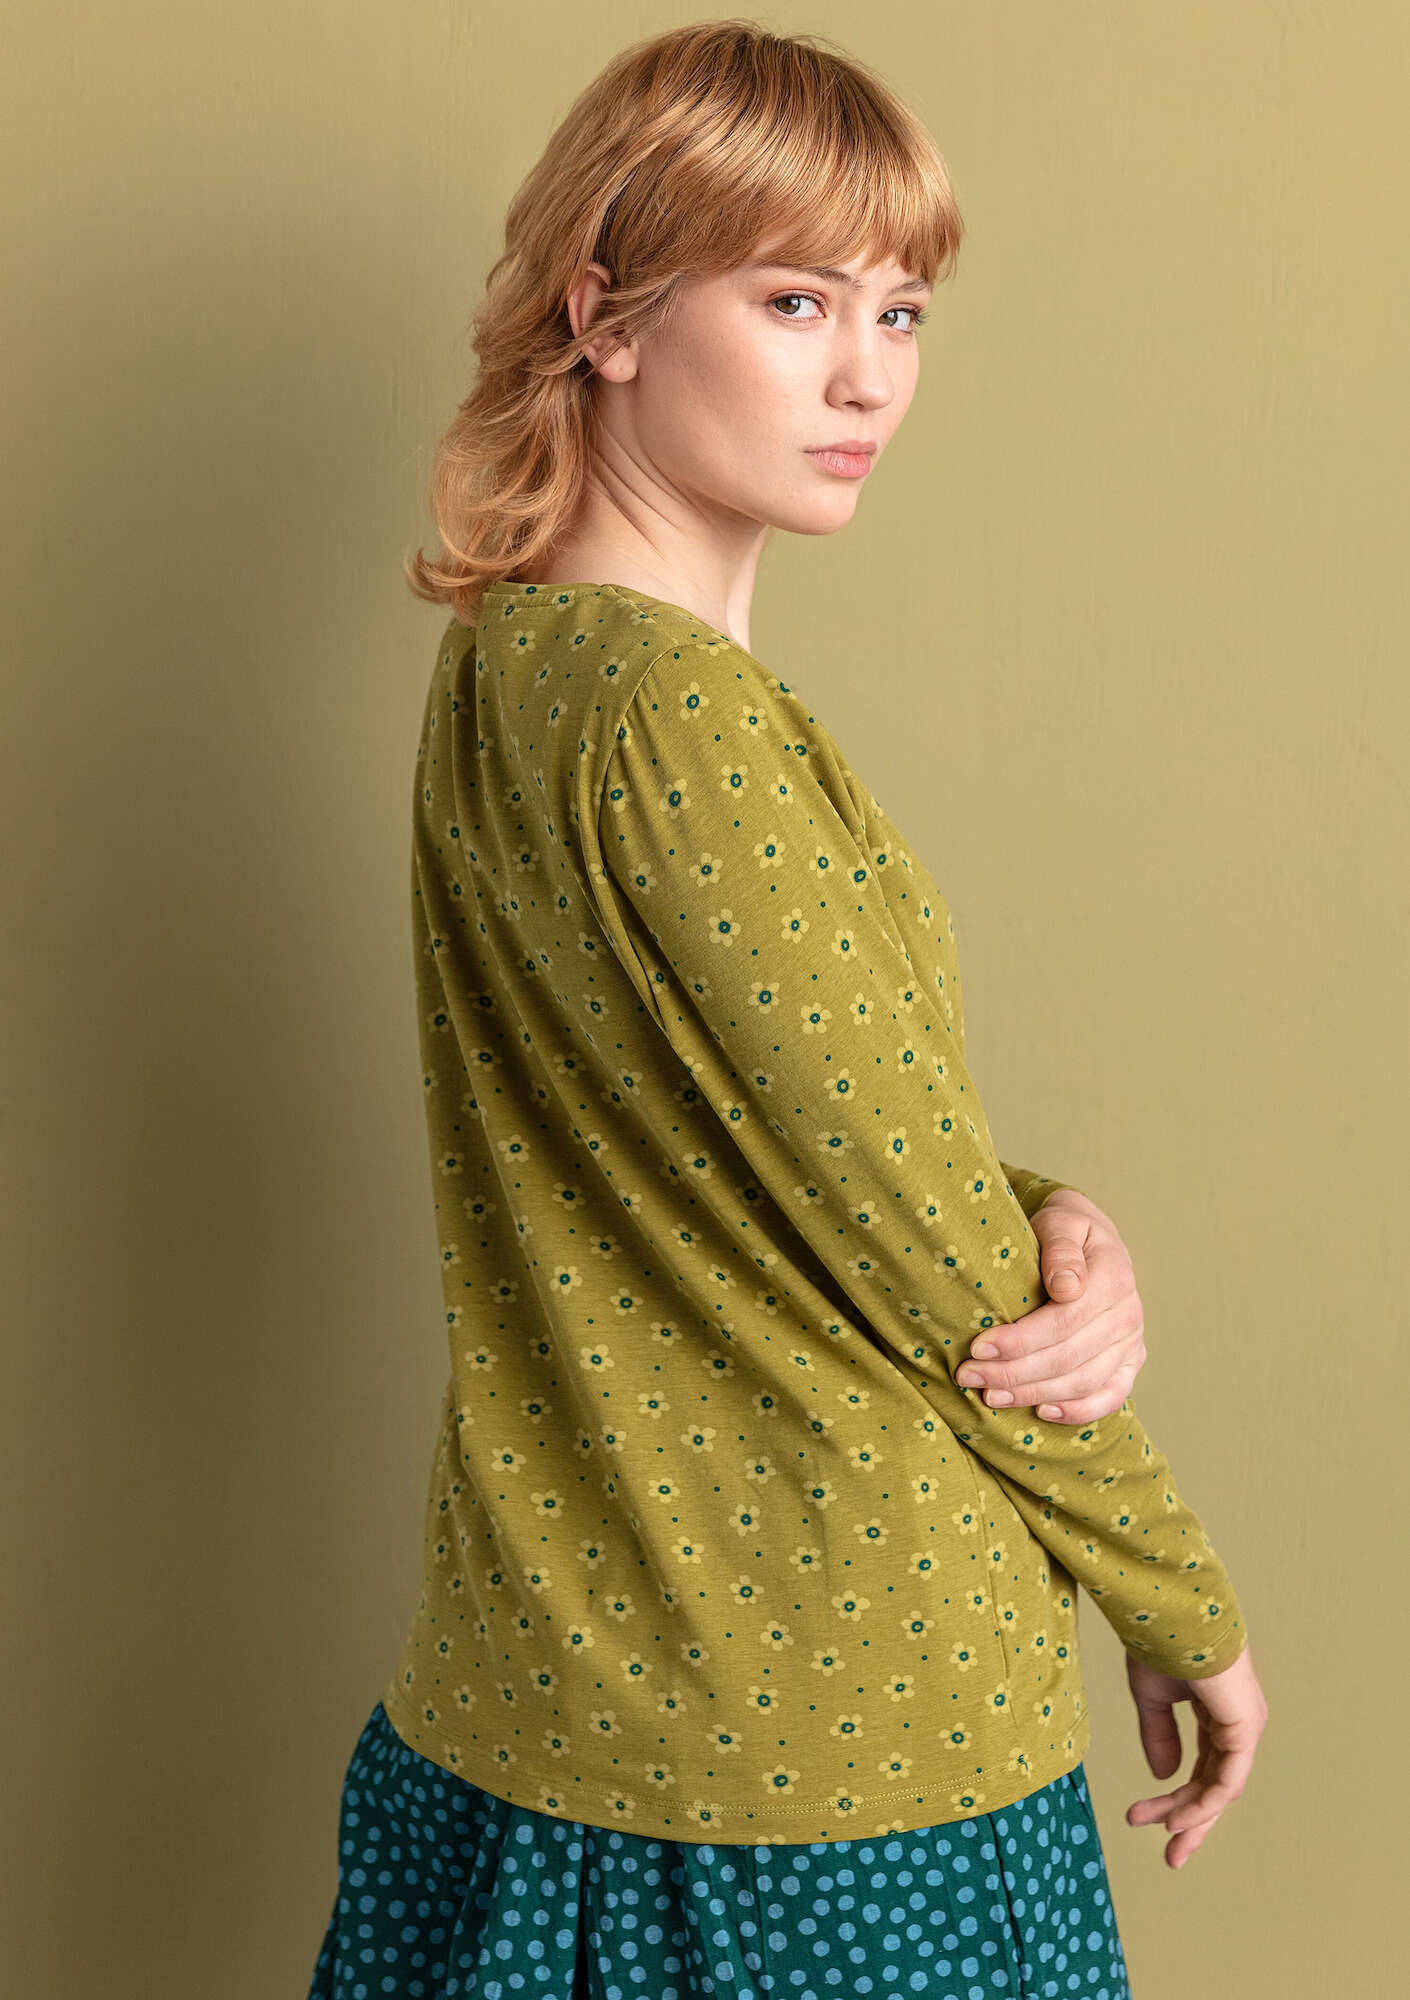 “Pytte” jersey top in organic cotton/elastane avocado/patterned thumbnail